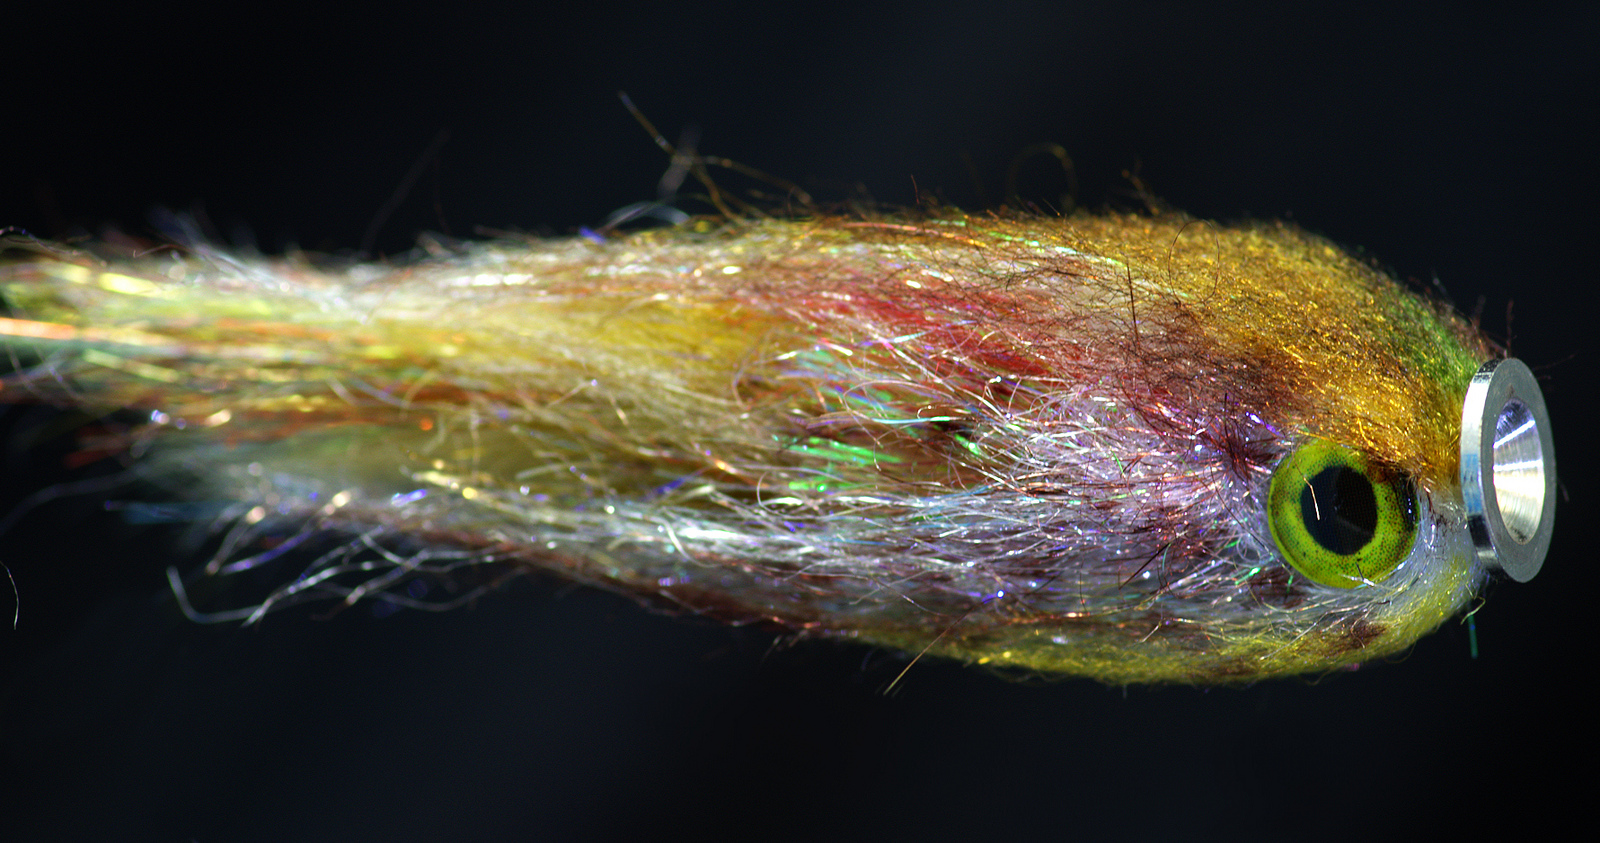 The Tube Fly Primer, Part 1: Why Tubes? - Fly Fish Food